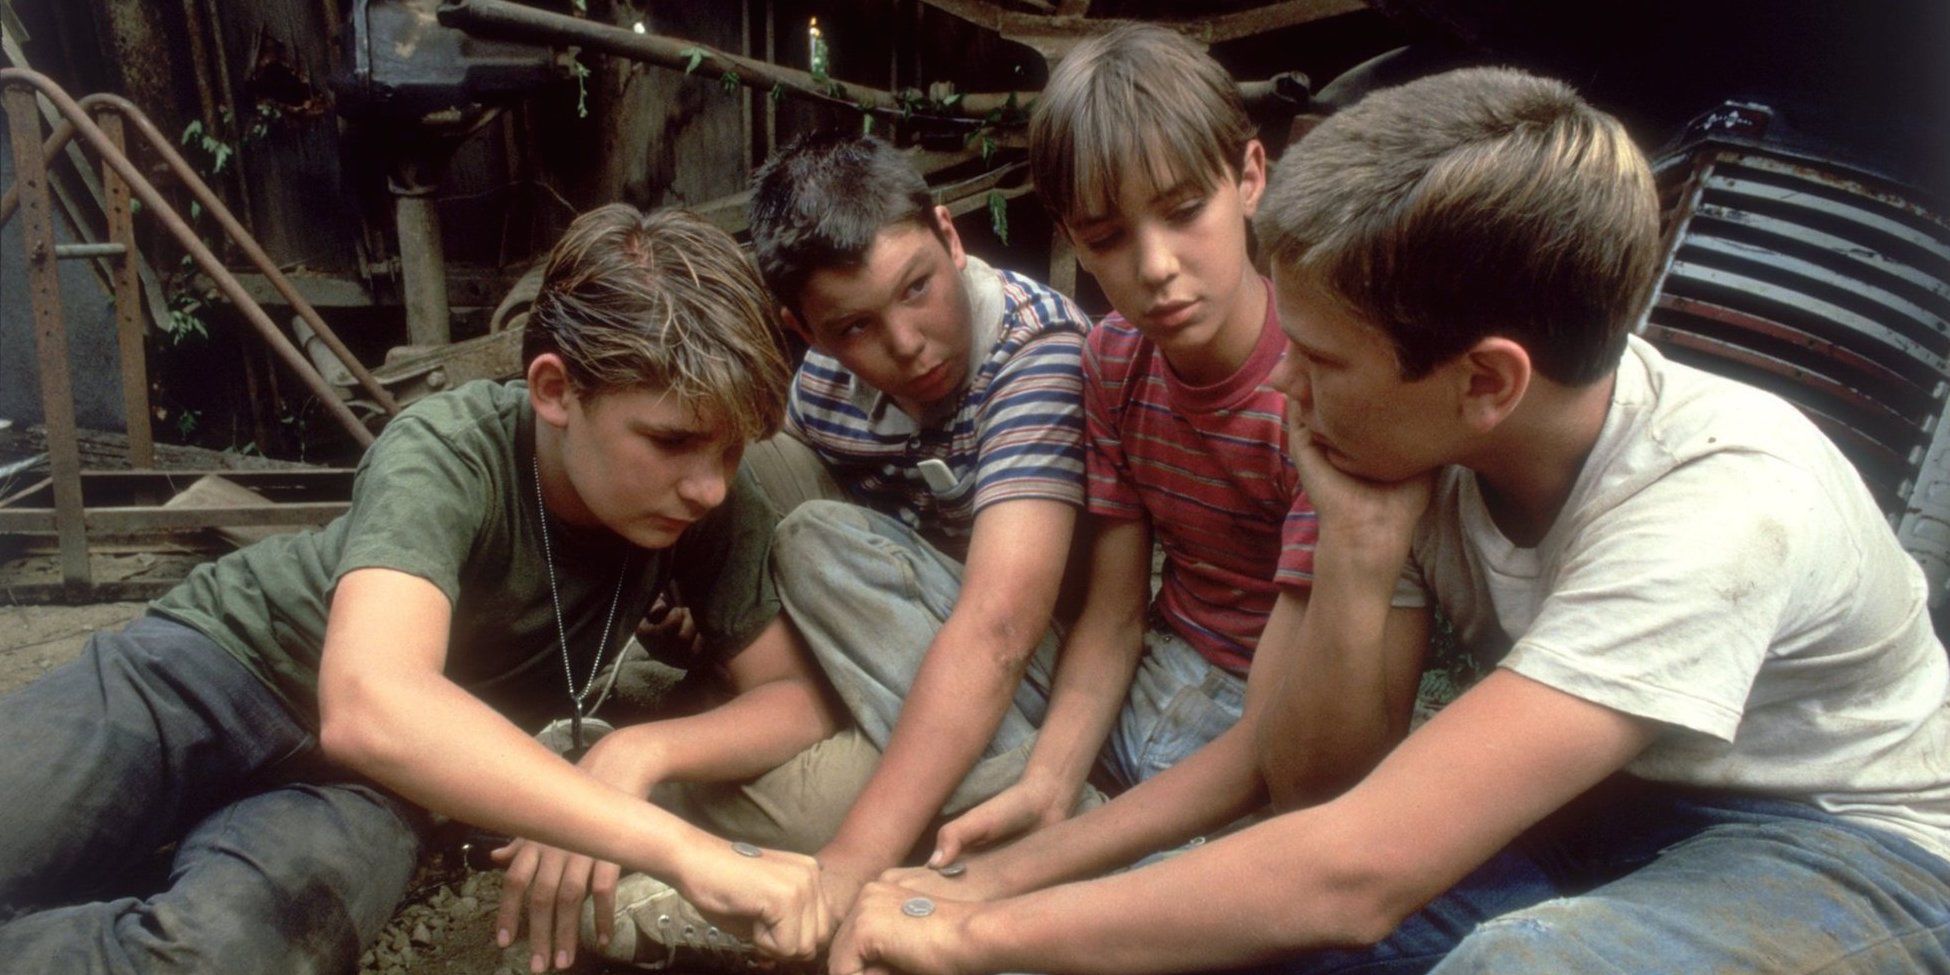 The four boys putting their hands together in Stand By Me